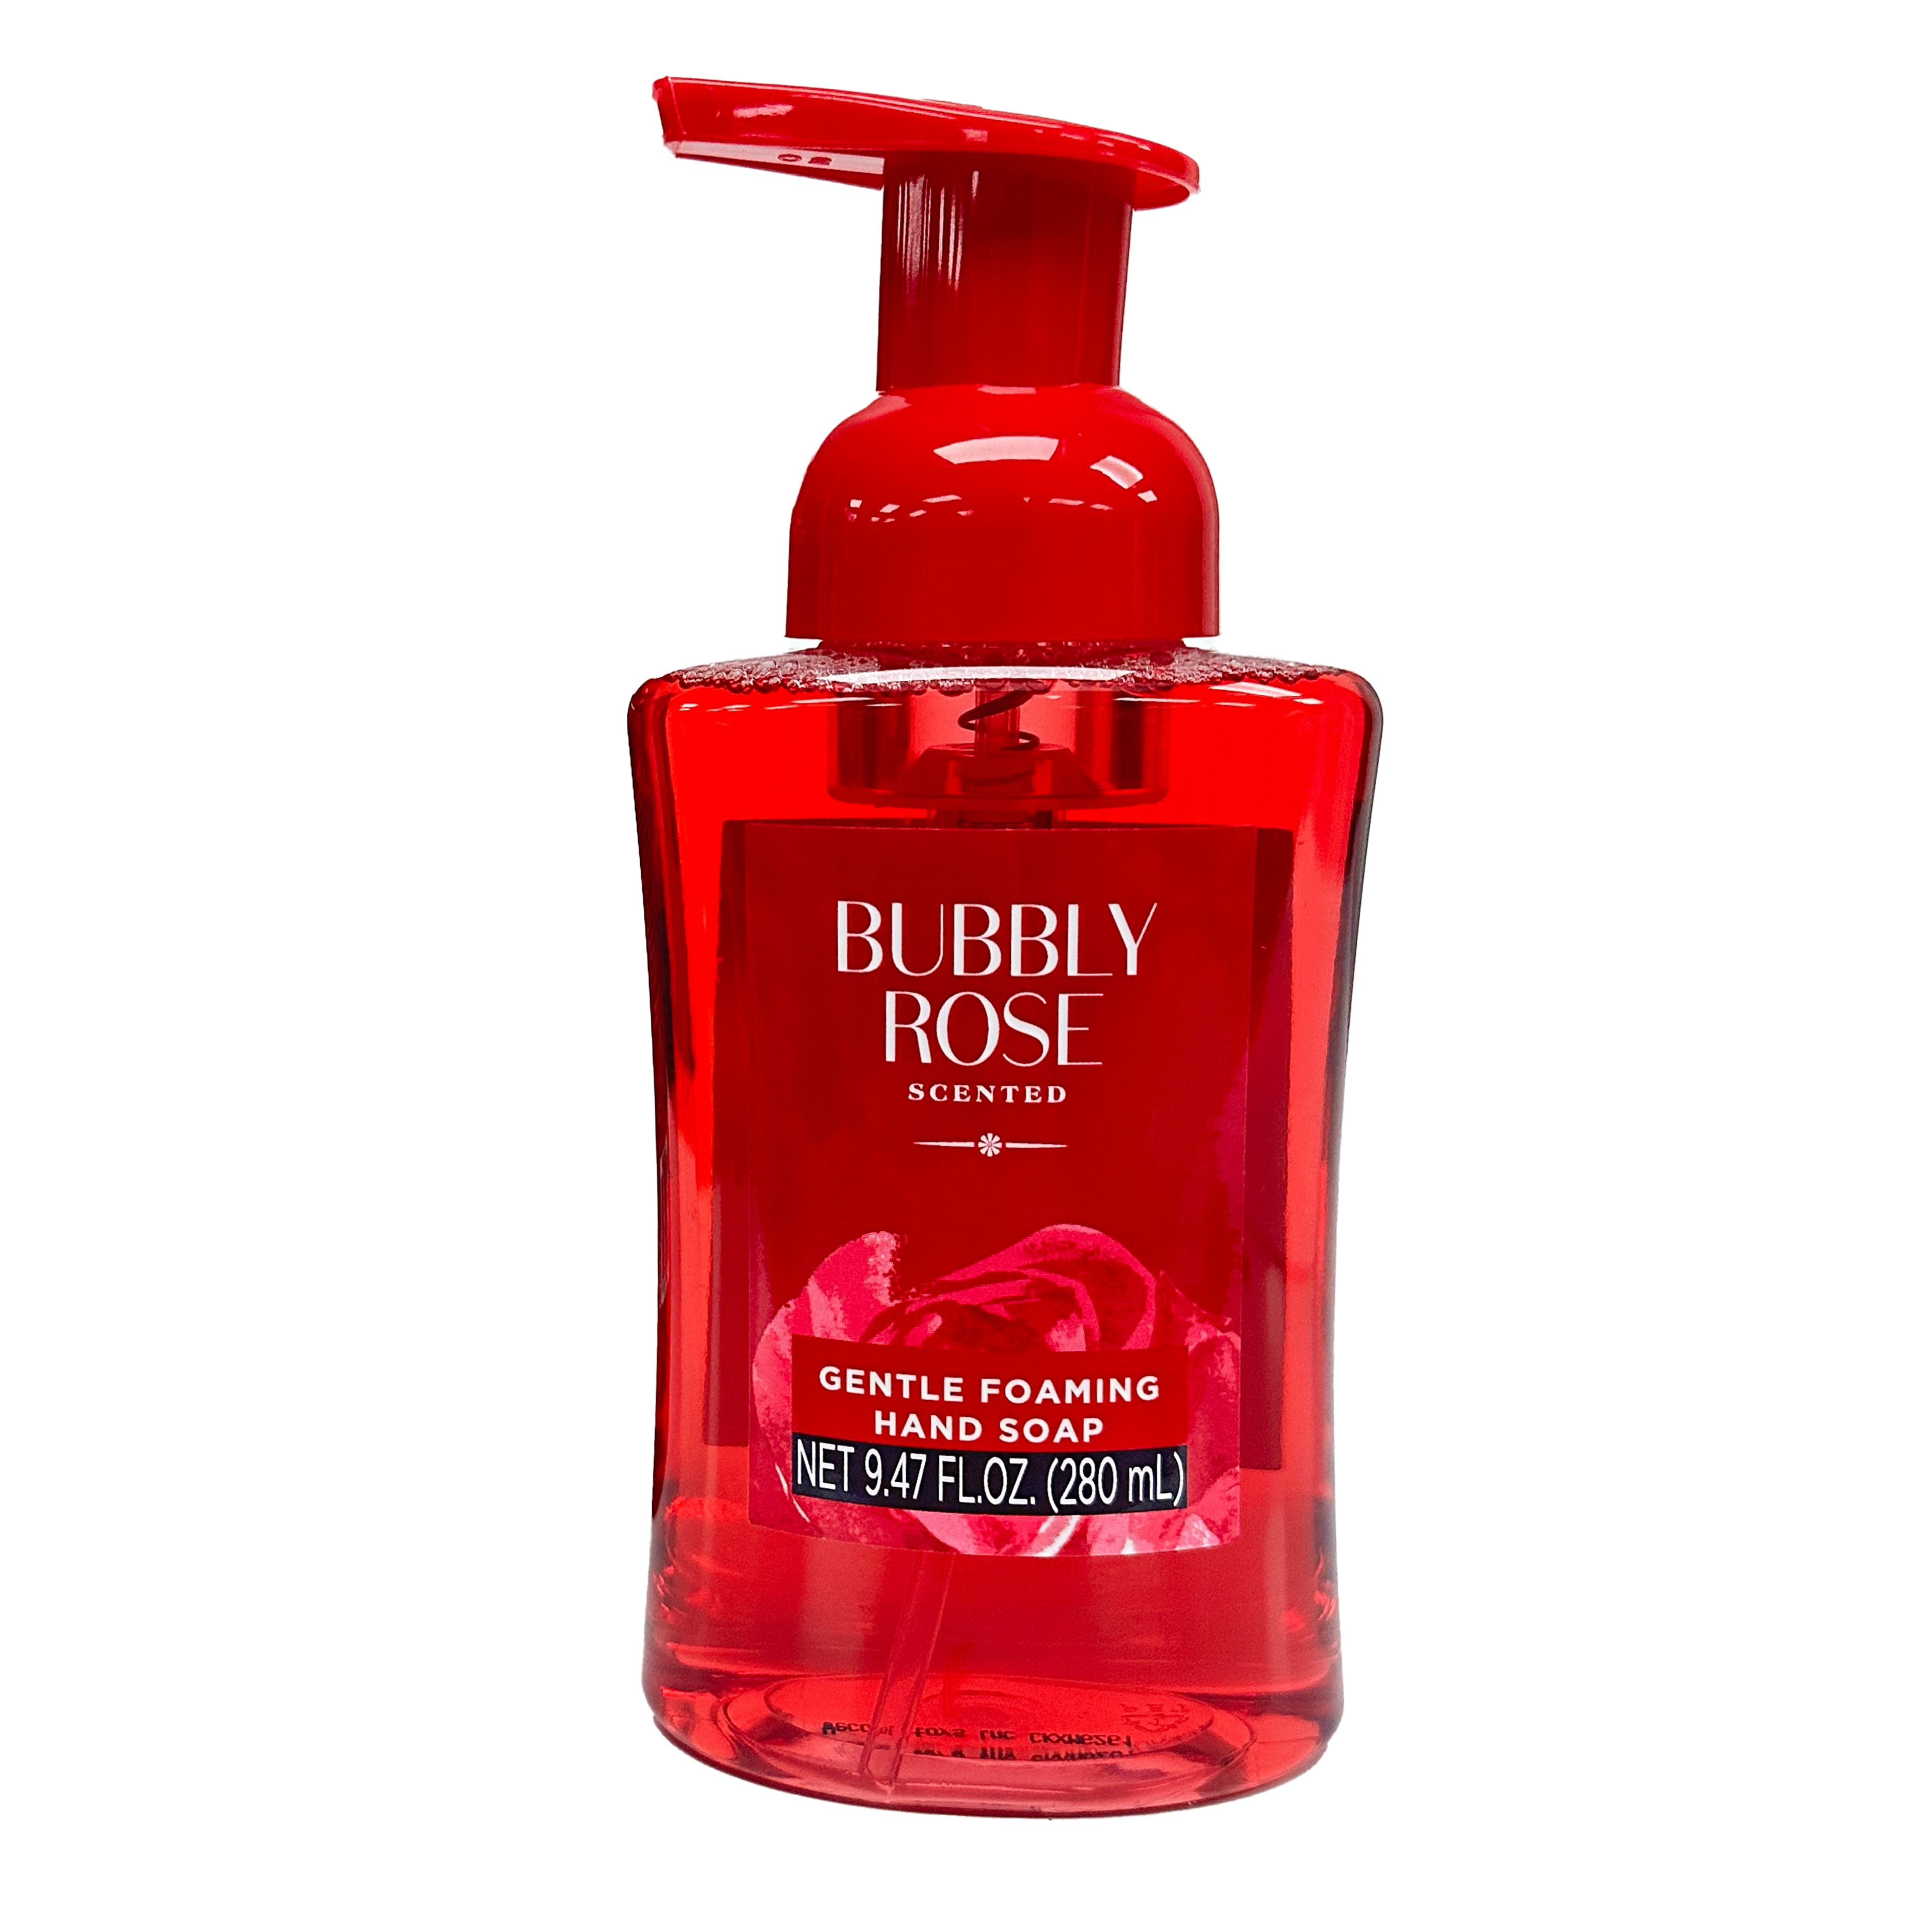 Bubbly Rose Scented Gentle Foaming Hand Soap